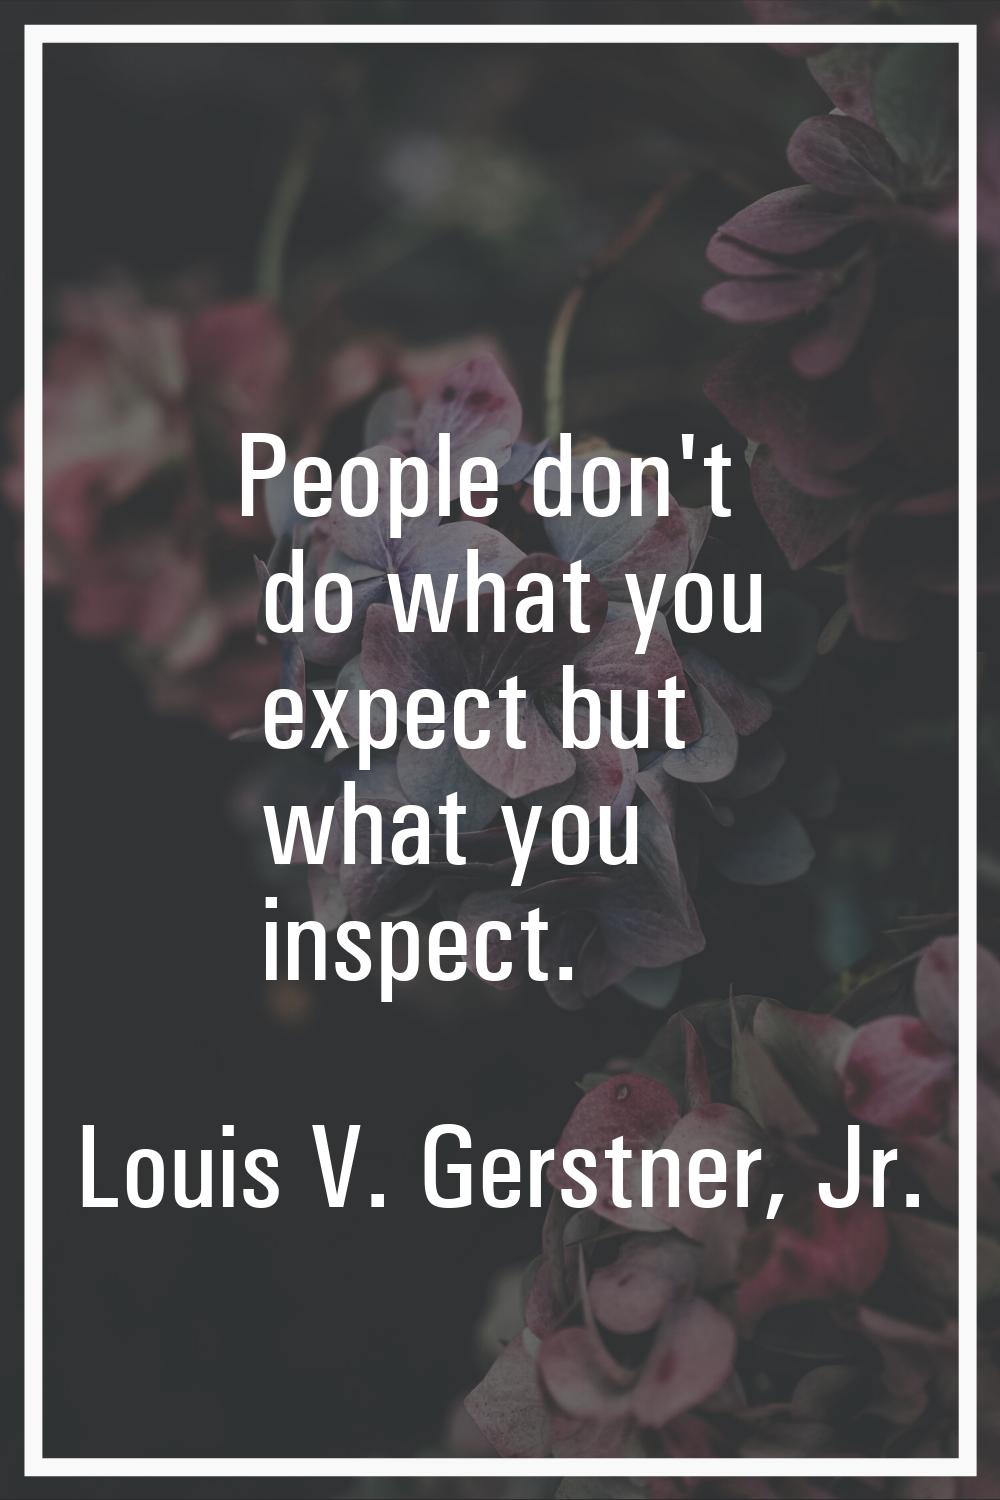 People don't do what you expect but what you inspect.